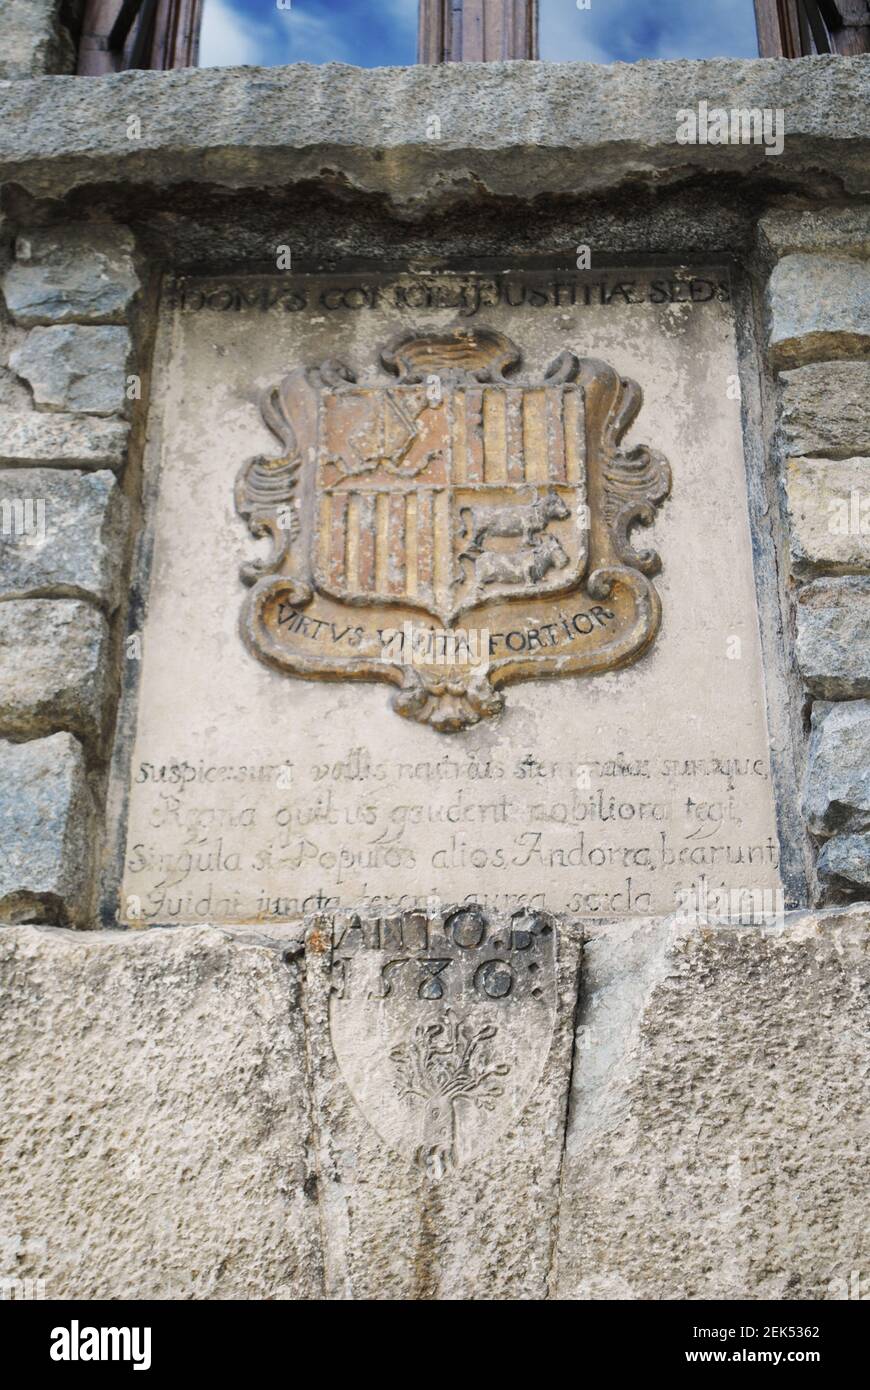 The historical Casa de la Vall, a 16th-century building in the heart of Andorra la Vella featuring the country's new, currently used coat of arms. Stock Photo